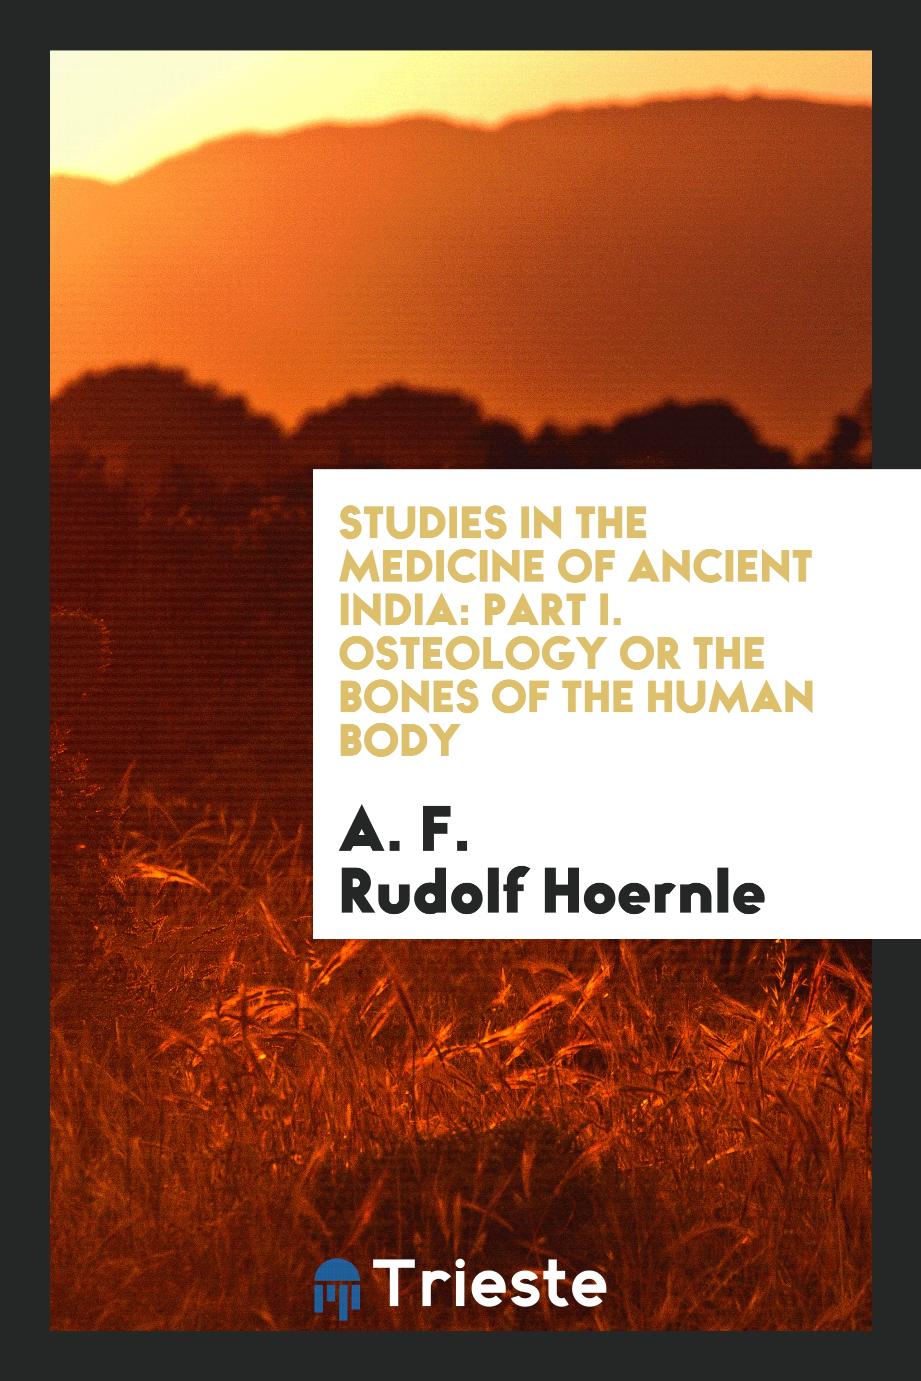 Studies in the Medicine of Ancient India: Part I. Osteology or the Bones of the Human Body